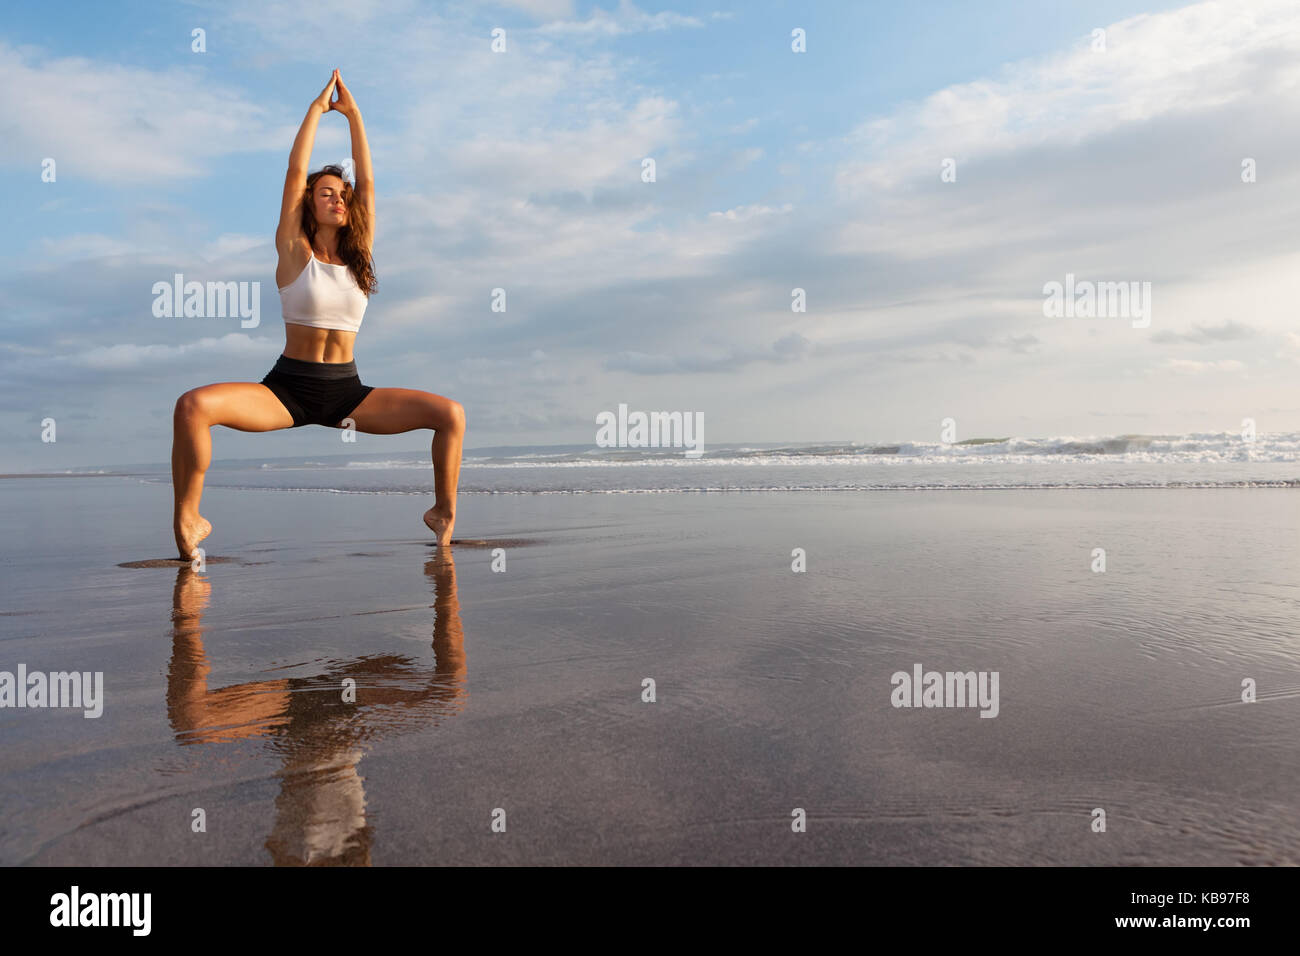 Meditation on sunset sky background. Young active woman in yoga